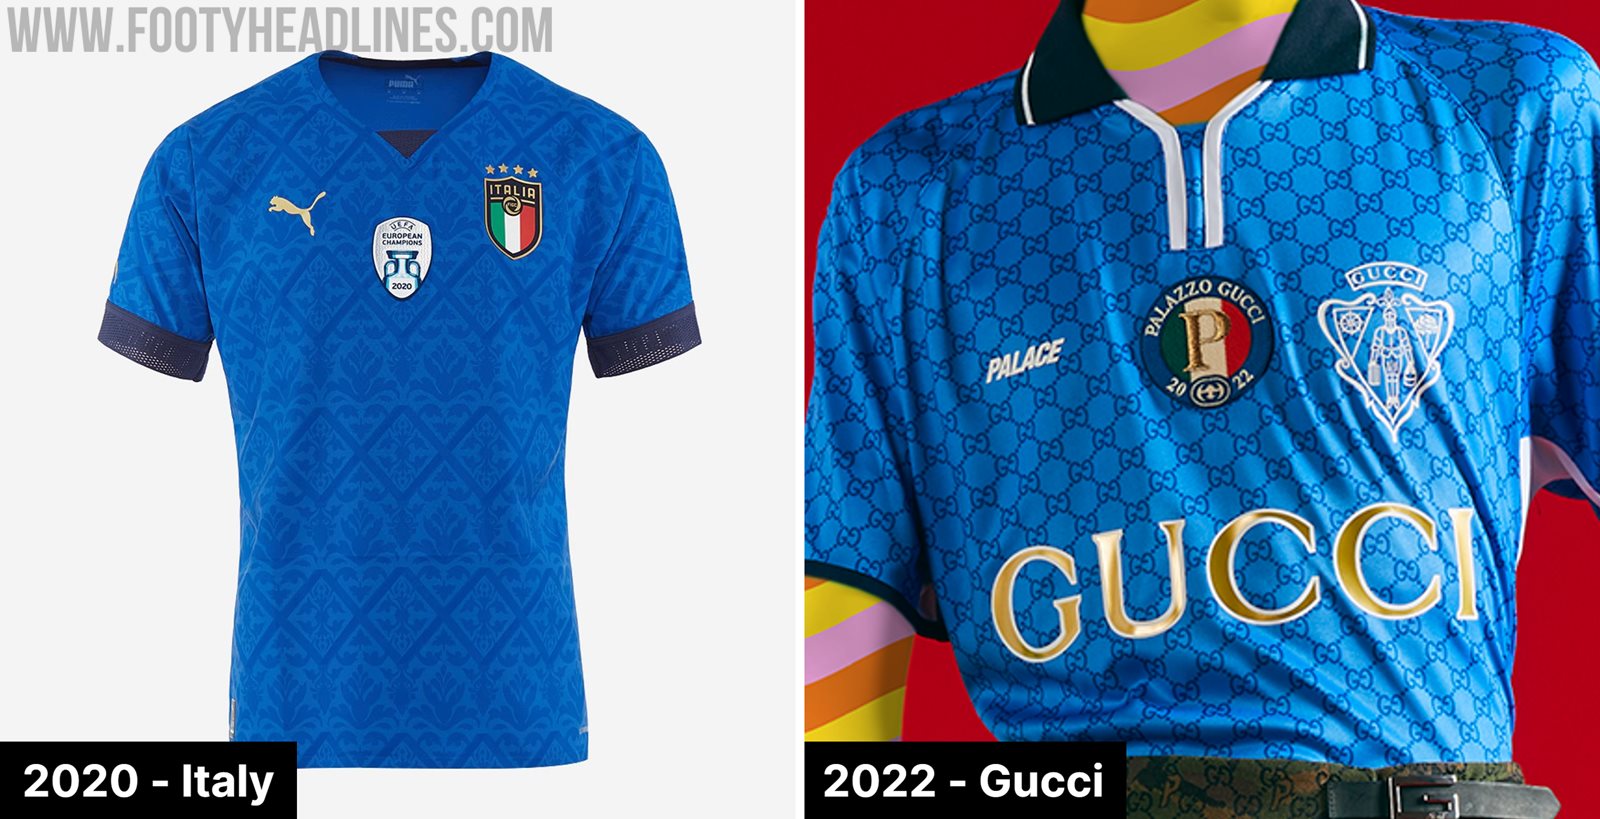 Palace and Gucci Combine to Drop Three Football Jerseys In New Collection